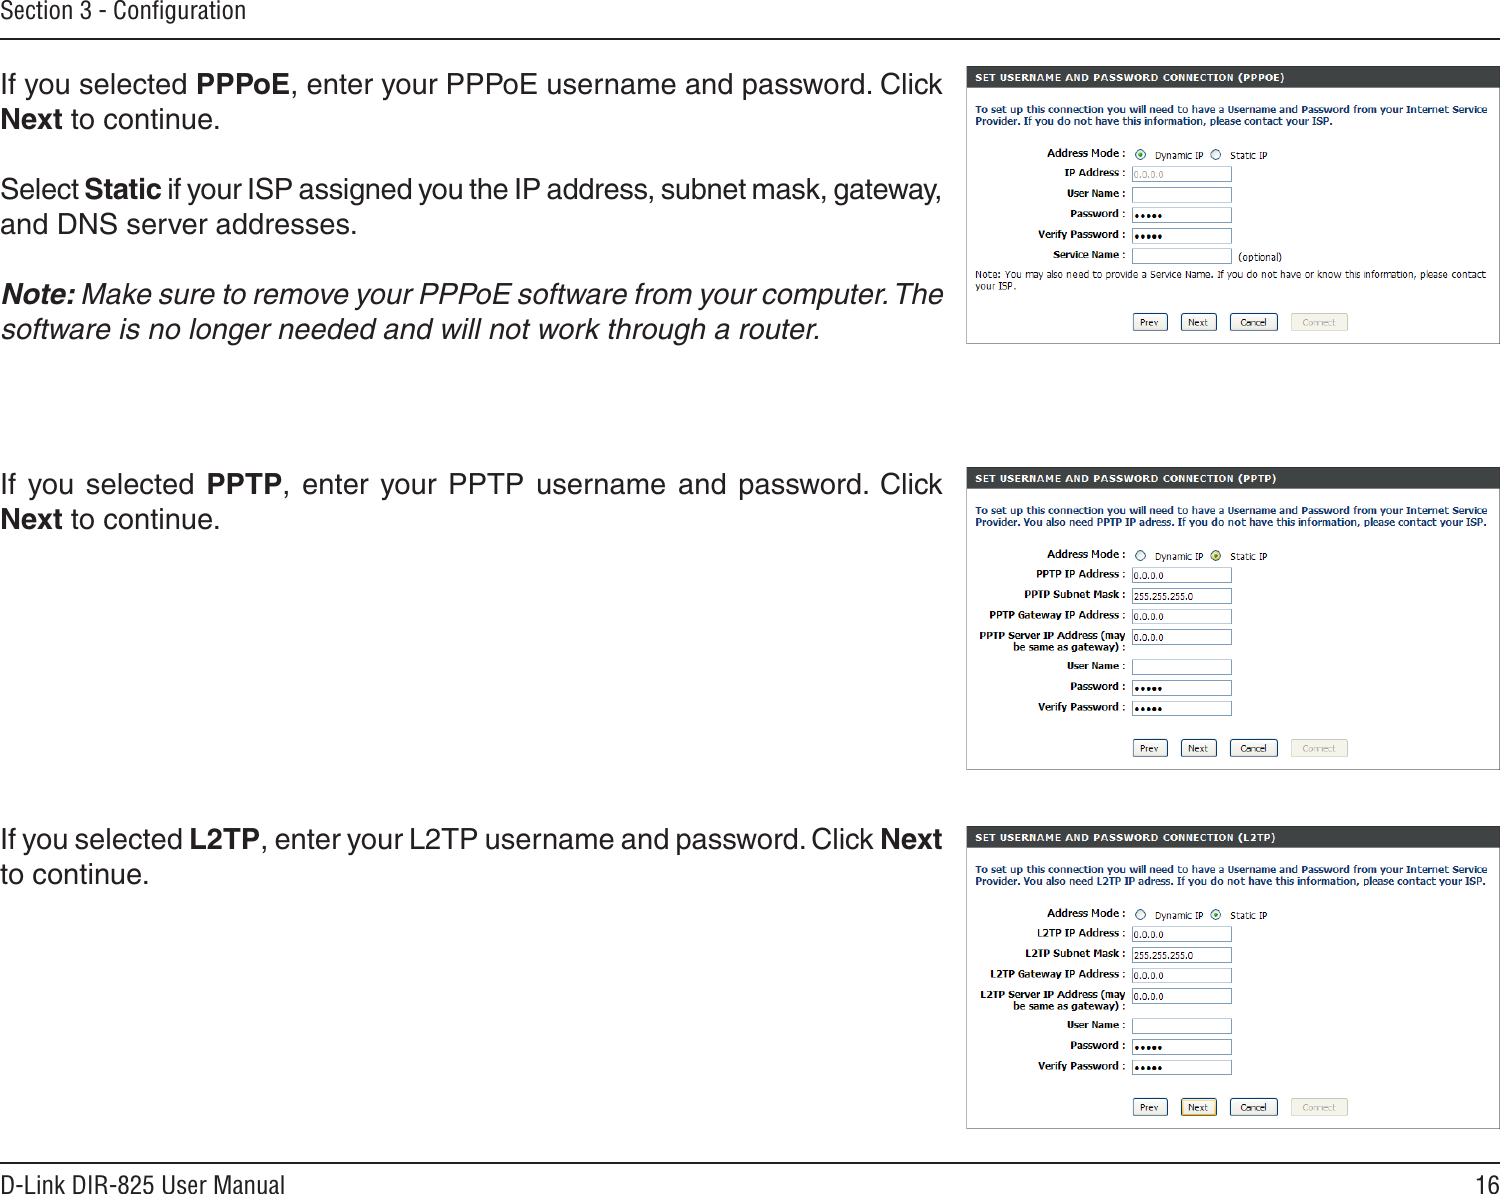 16D-Link DIR-825 User ManualSection 3 - ConﬁgurationIf you selected PPPoE, enter your PPPoE username and password. Click Next to continue.Select Static if your ISP assigned you the IP address, subnet mask, gateway, and DNS server addresses.Note: Make sure to remove your PPPoE software from your computer. The software is no longer needed and will not work through a router.If  you selected  PPTP,  enter  your PPTP  username  and  password. Click Next to continue.If you selected L2TP, enter your L2TP username and password. Click Next to continue.